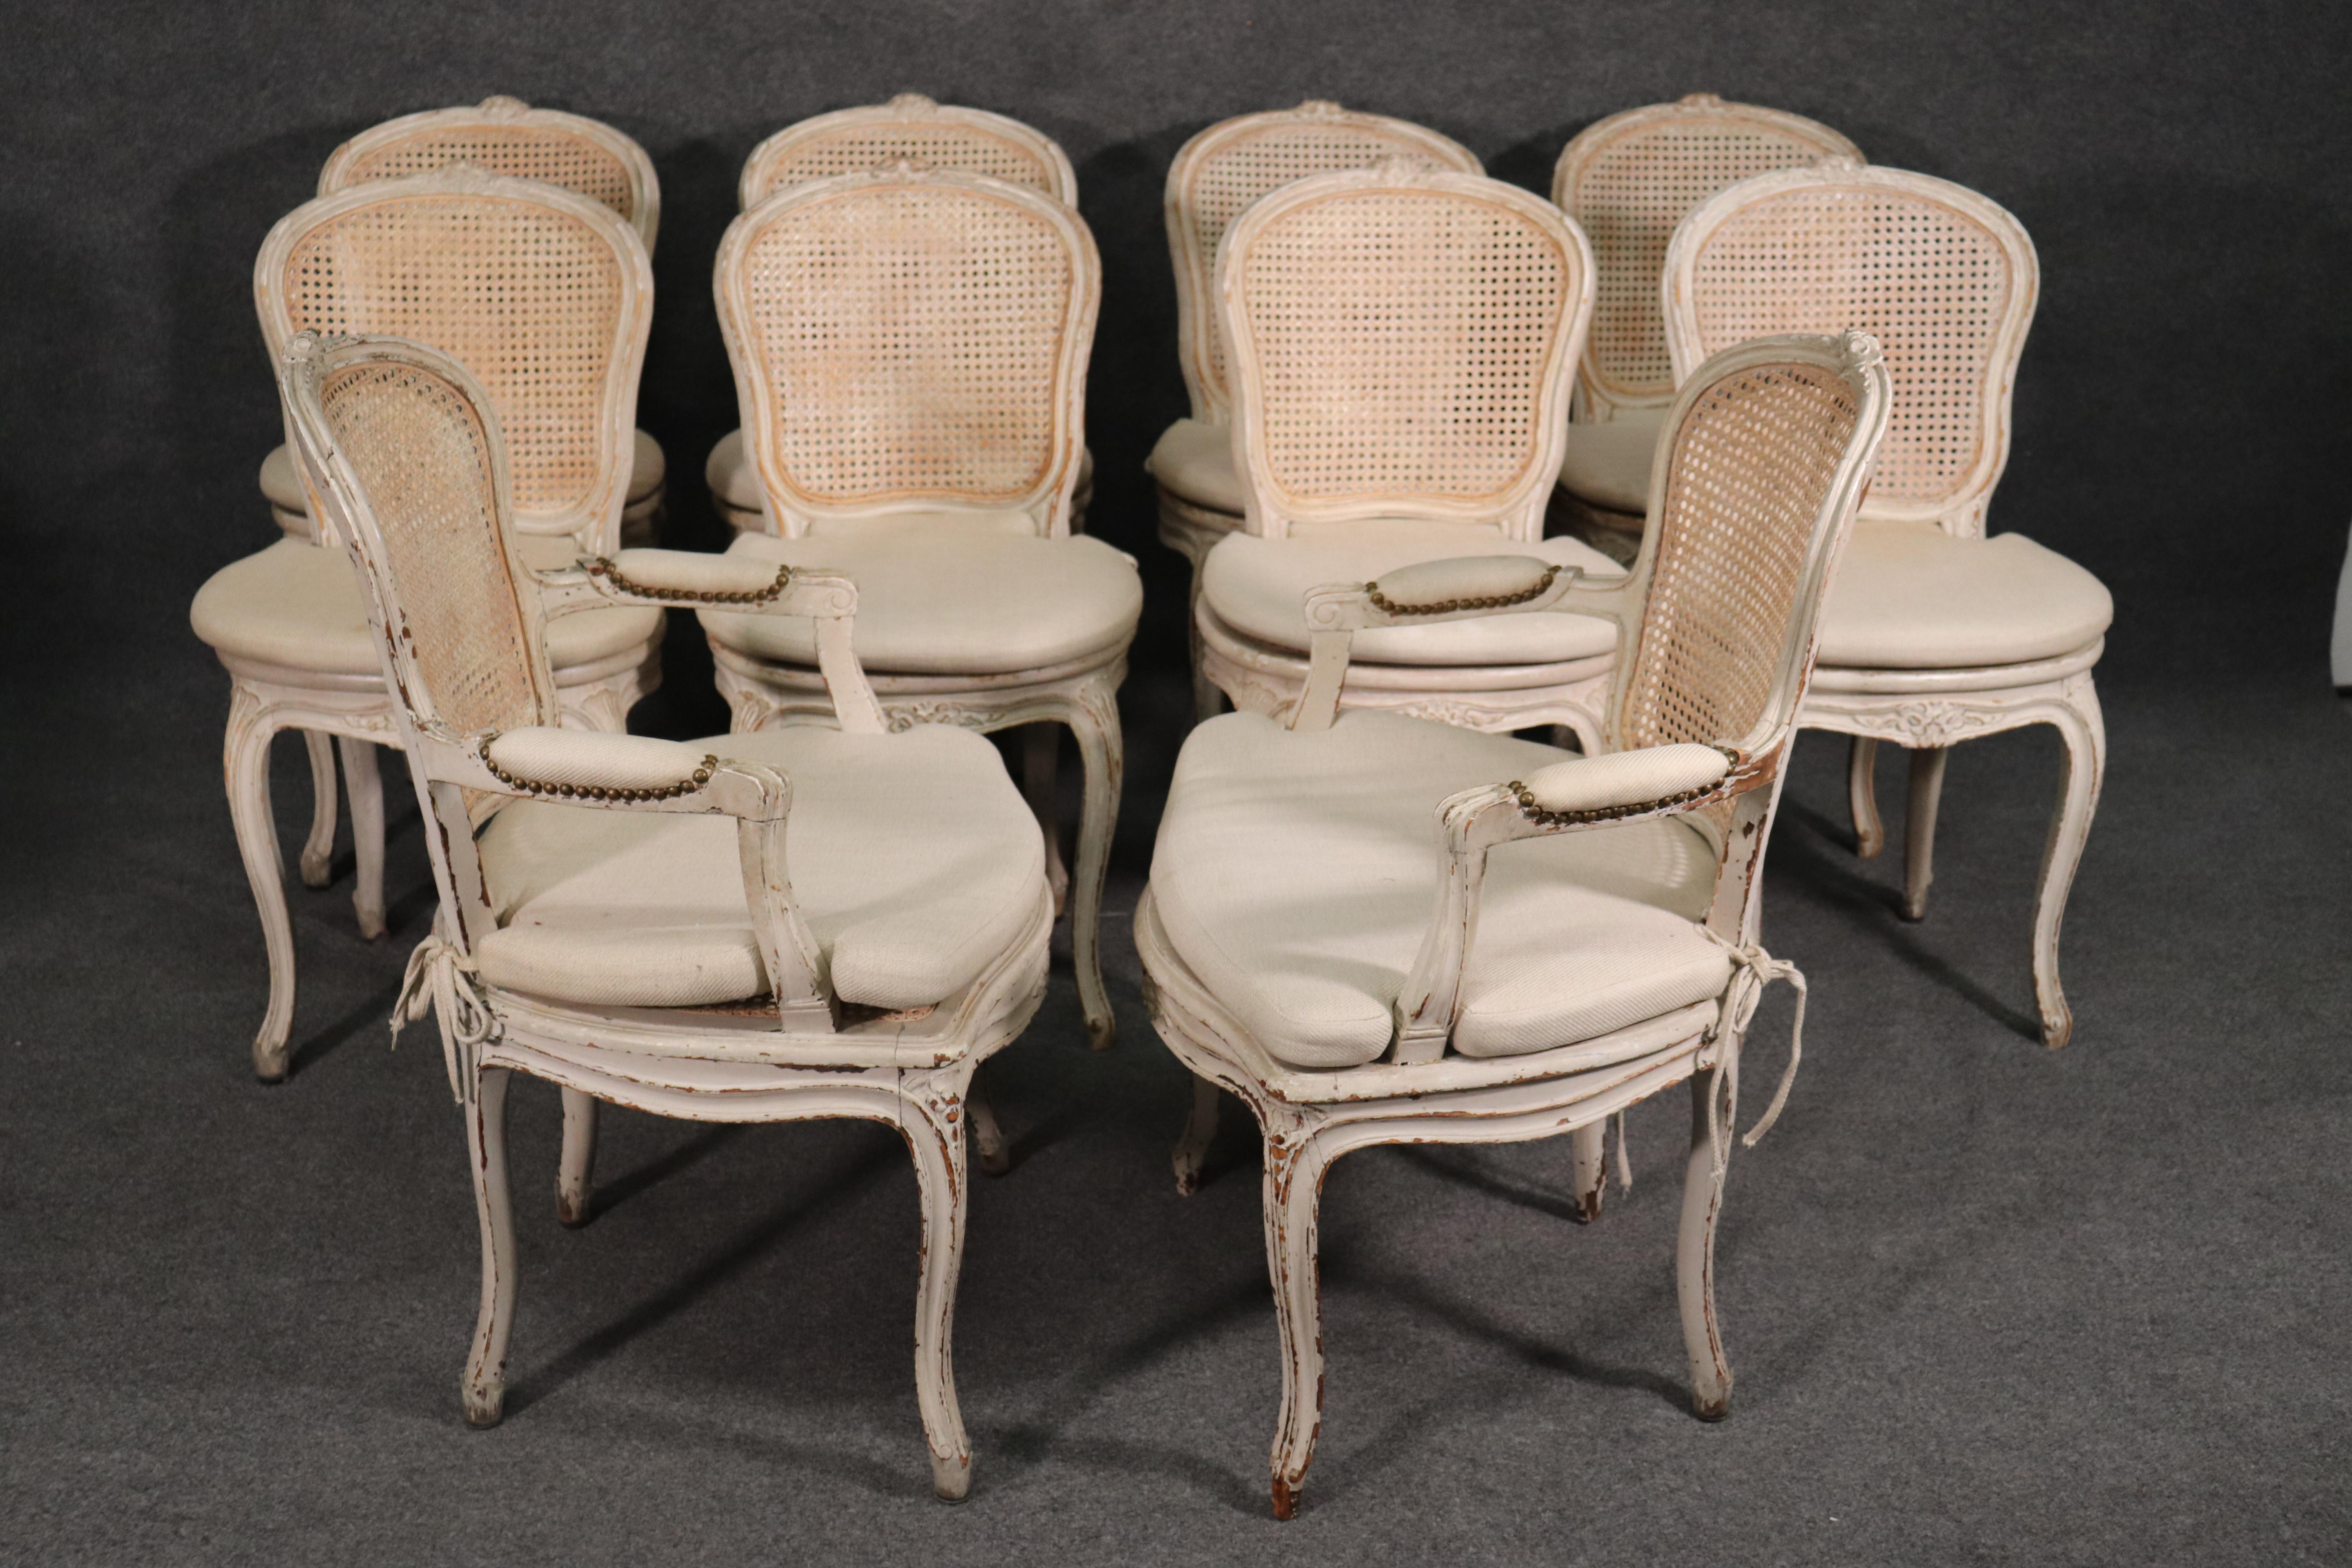 This is a fine set of absolutely gorgeous Maison Jansen chairs. Nine of the ten have no damage to the cane seats or backs, but one of the seats does have a small puncture which is shown. These are classic dining chairs in good antique condition.